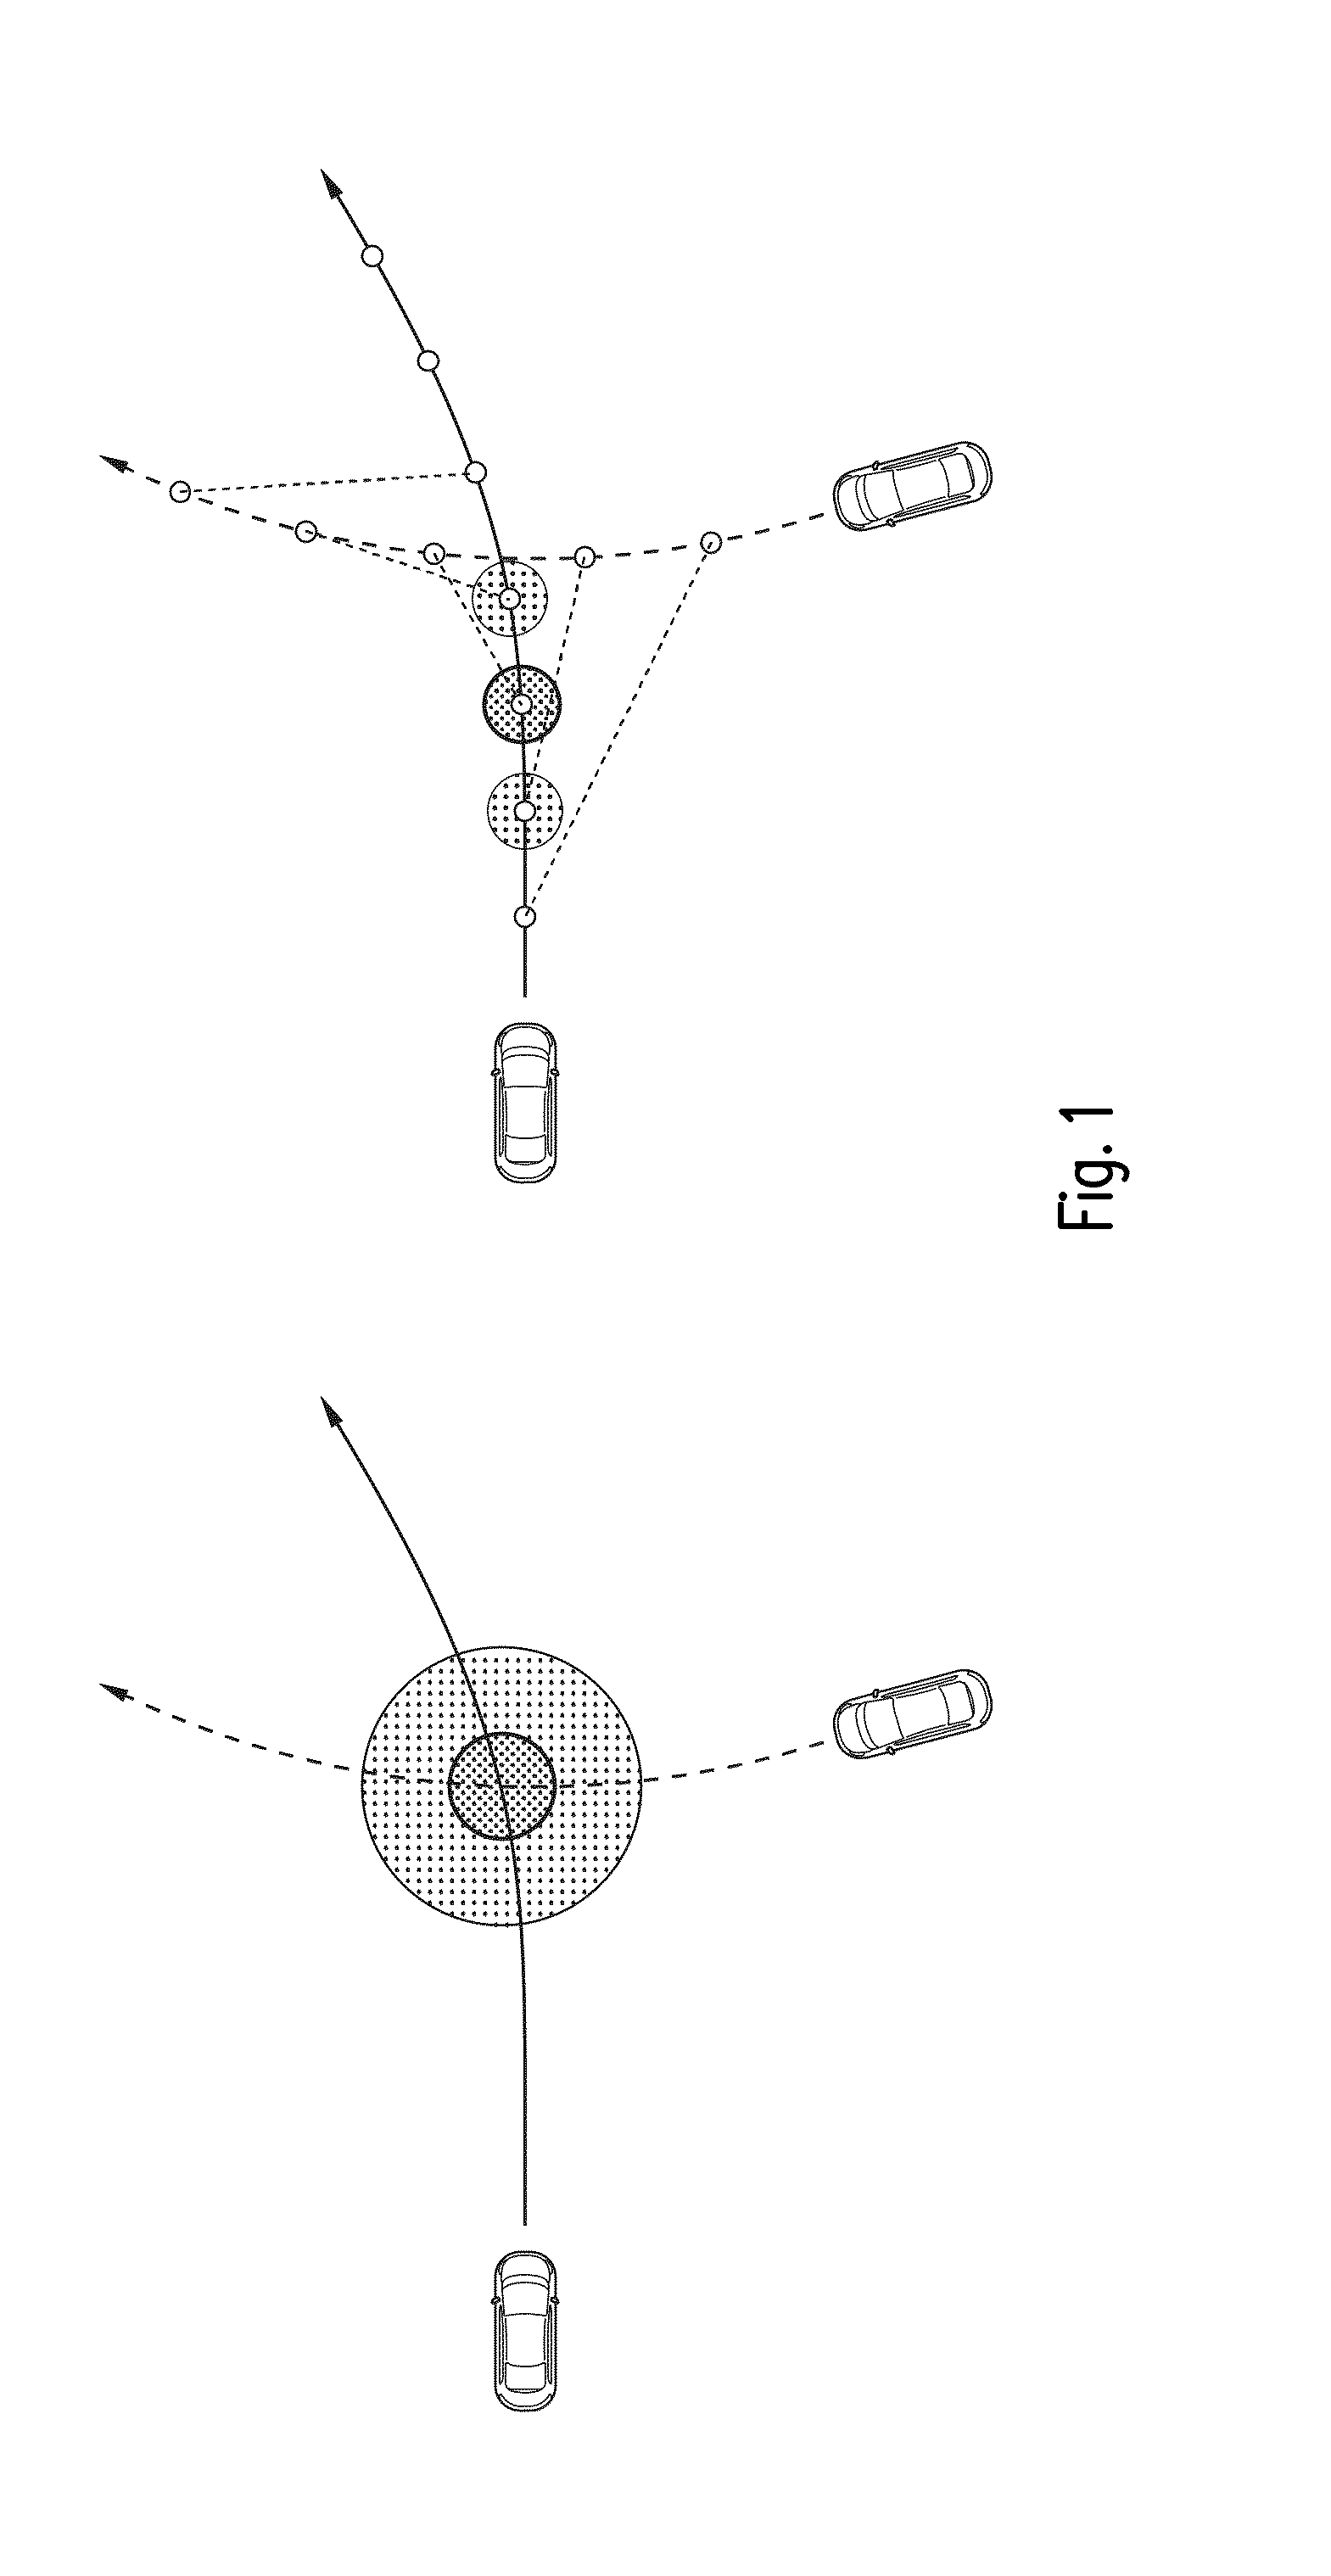 Method and vehicle with an advanced driver assistance system for risk-based traffic scene analysis